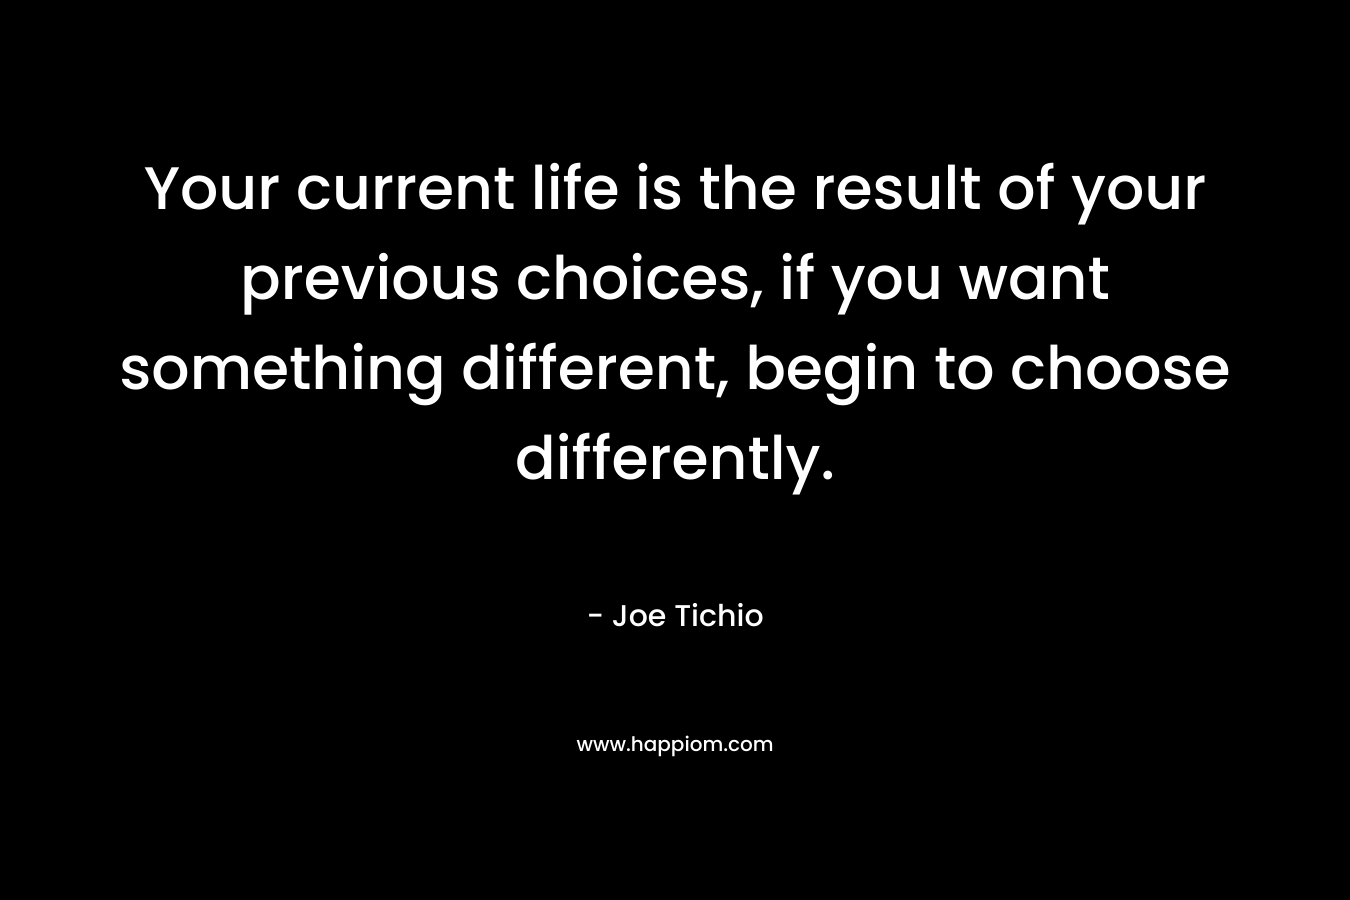 Your current life is the result of your previous choices, if you want something different, begin to choose differently.